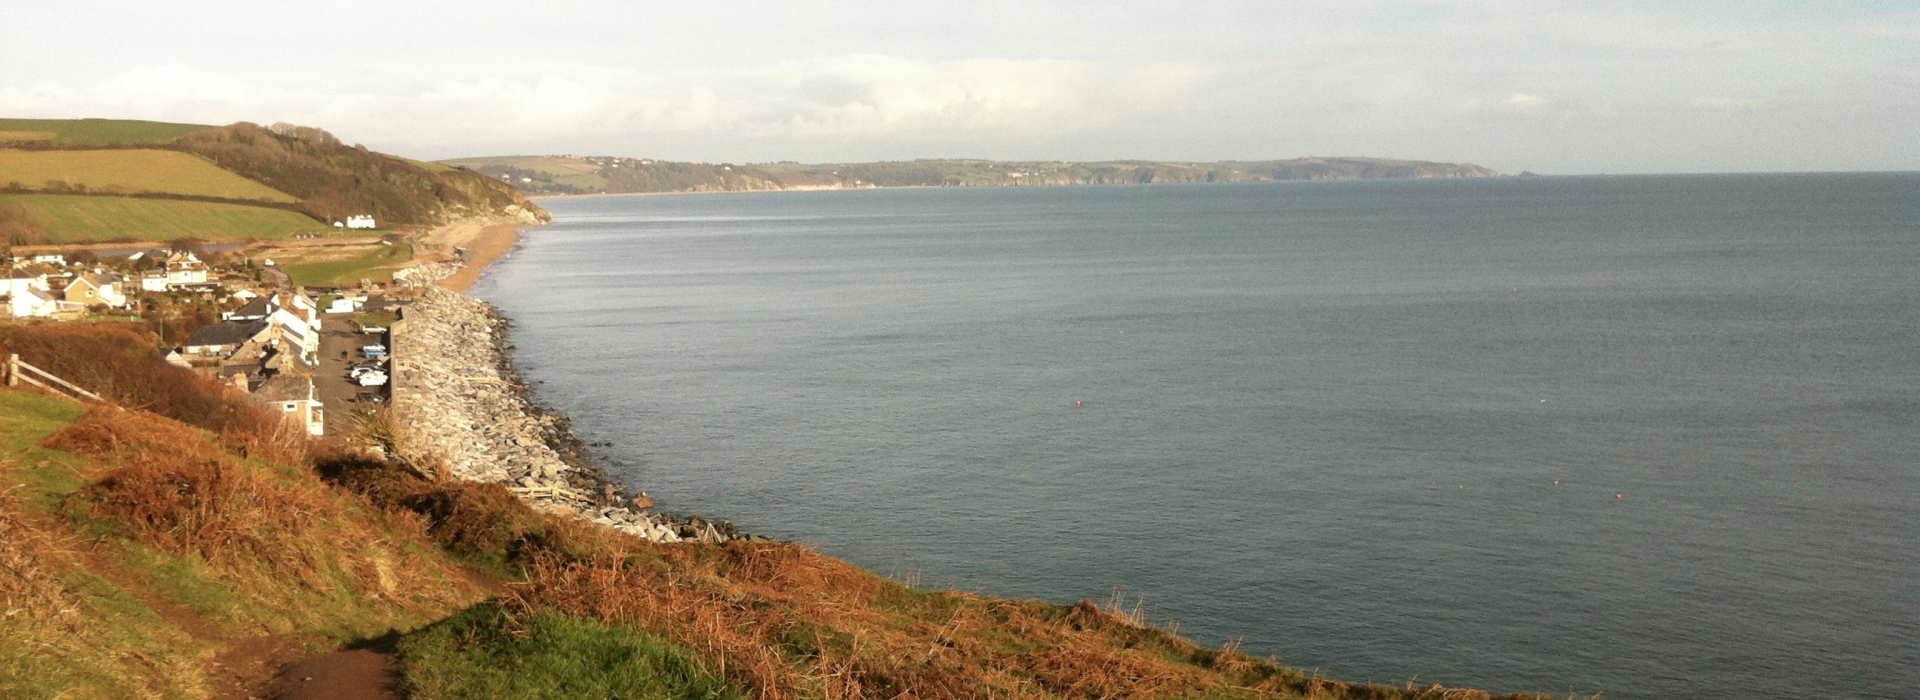 An image of the coast of Beesands